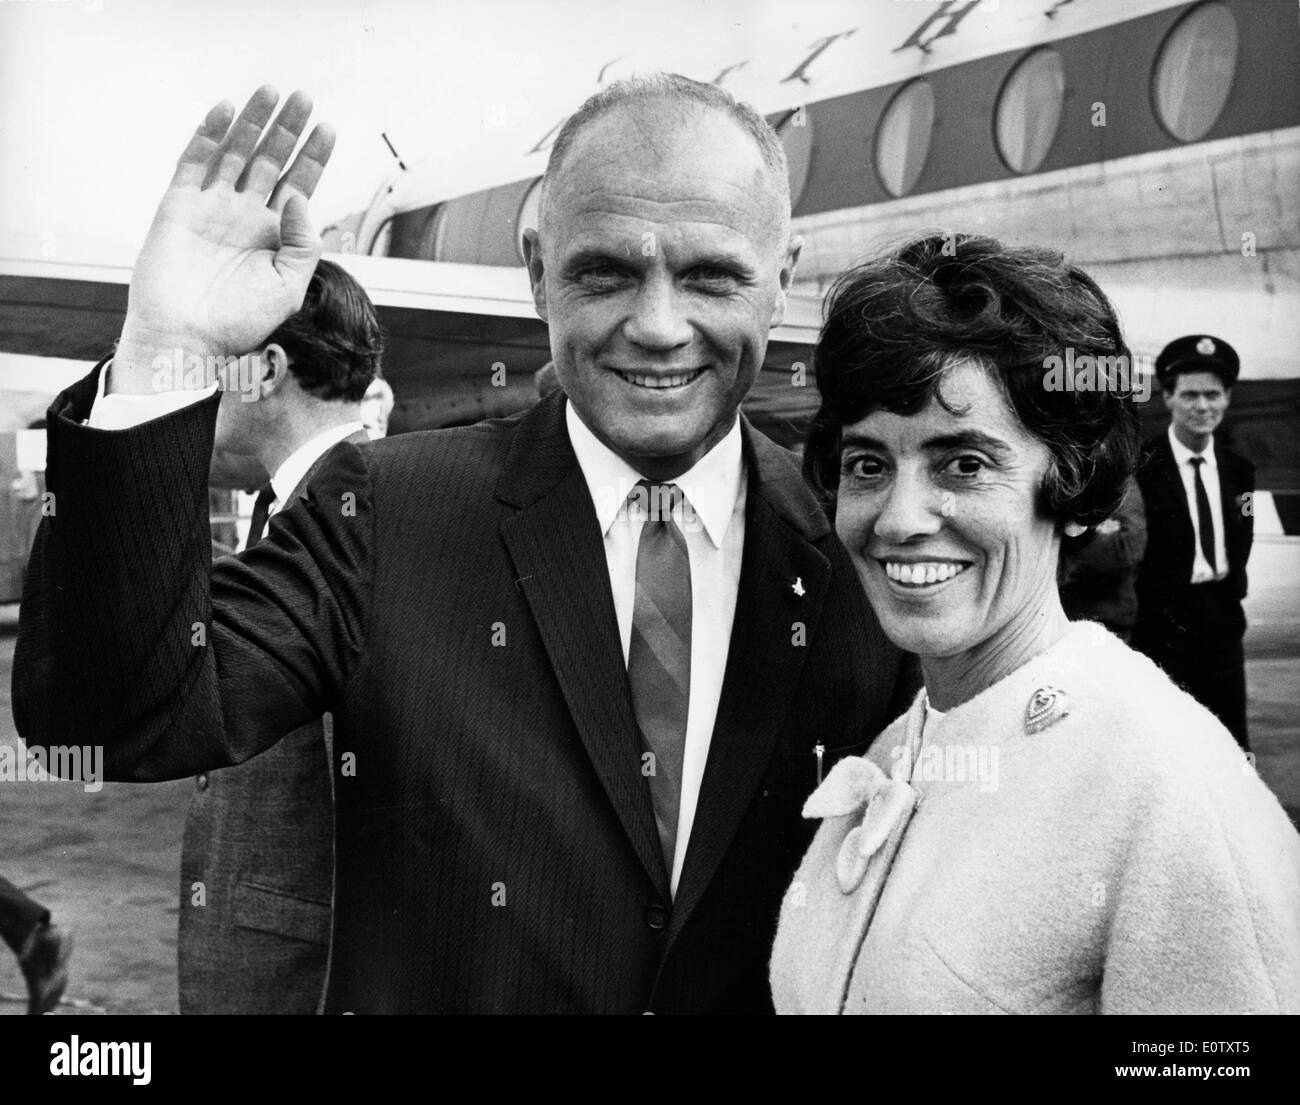 Astronaut John Glenn at airport with wife Annie Stock Photo - Alamy